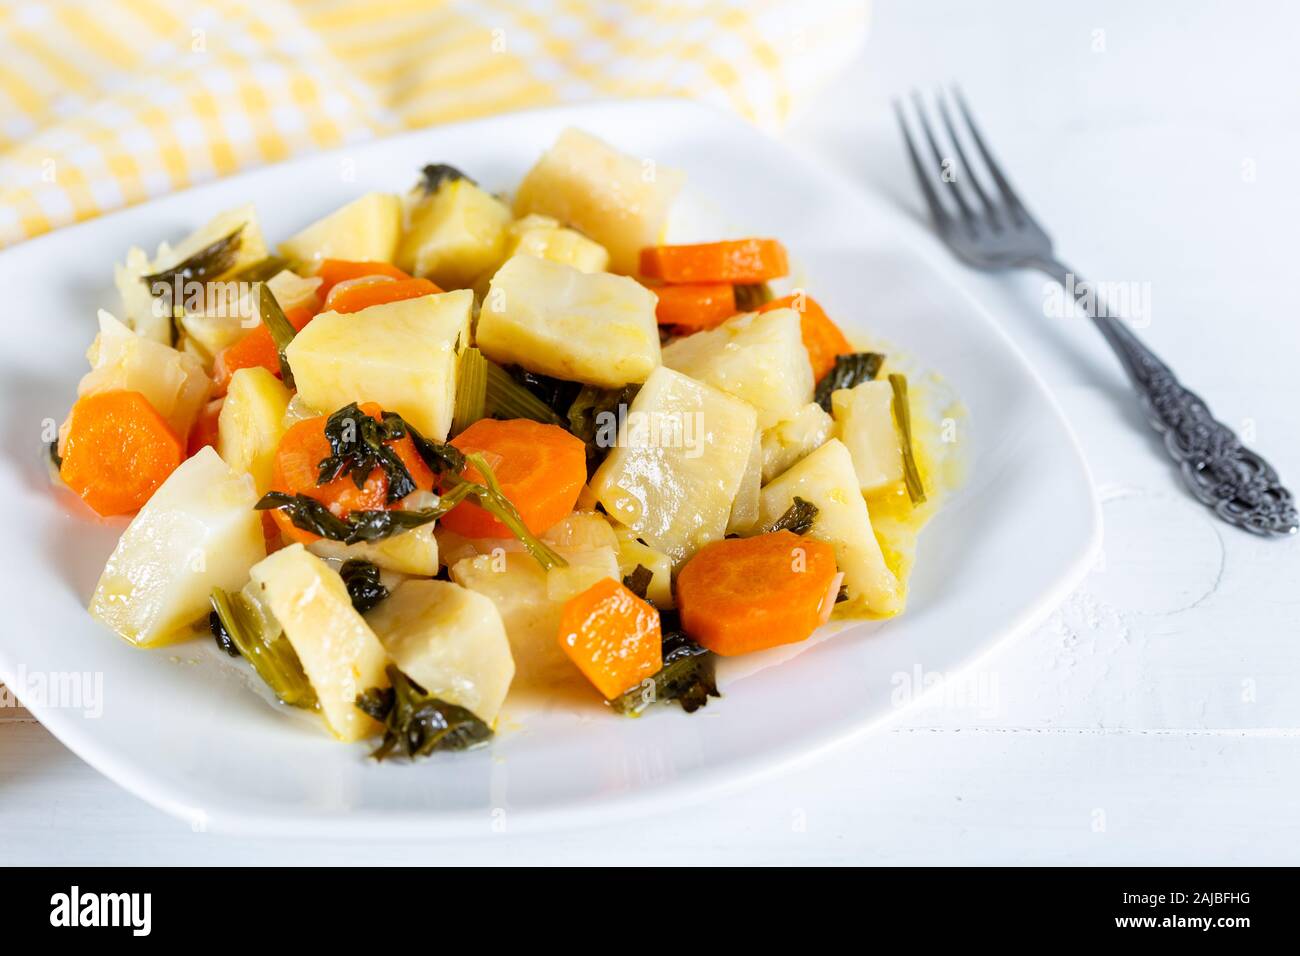 Turkish Olive Oil Food Celery Salad with Carrot and Parsley Stock Photo